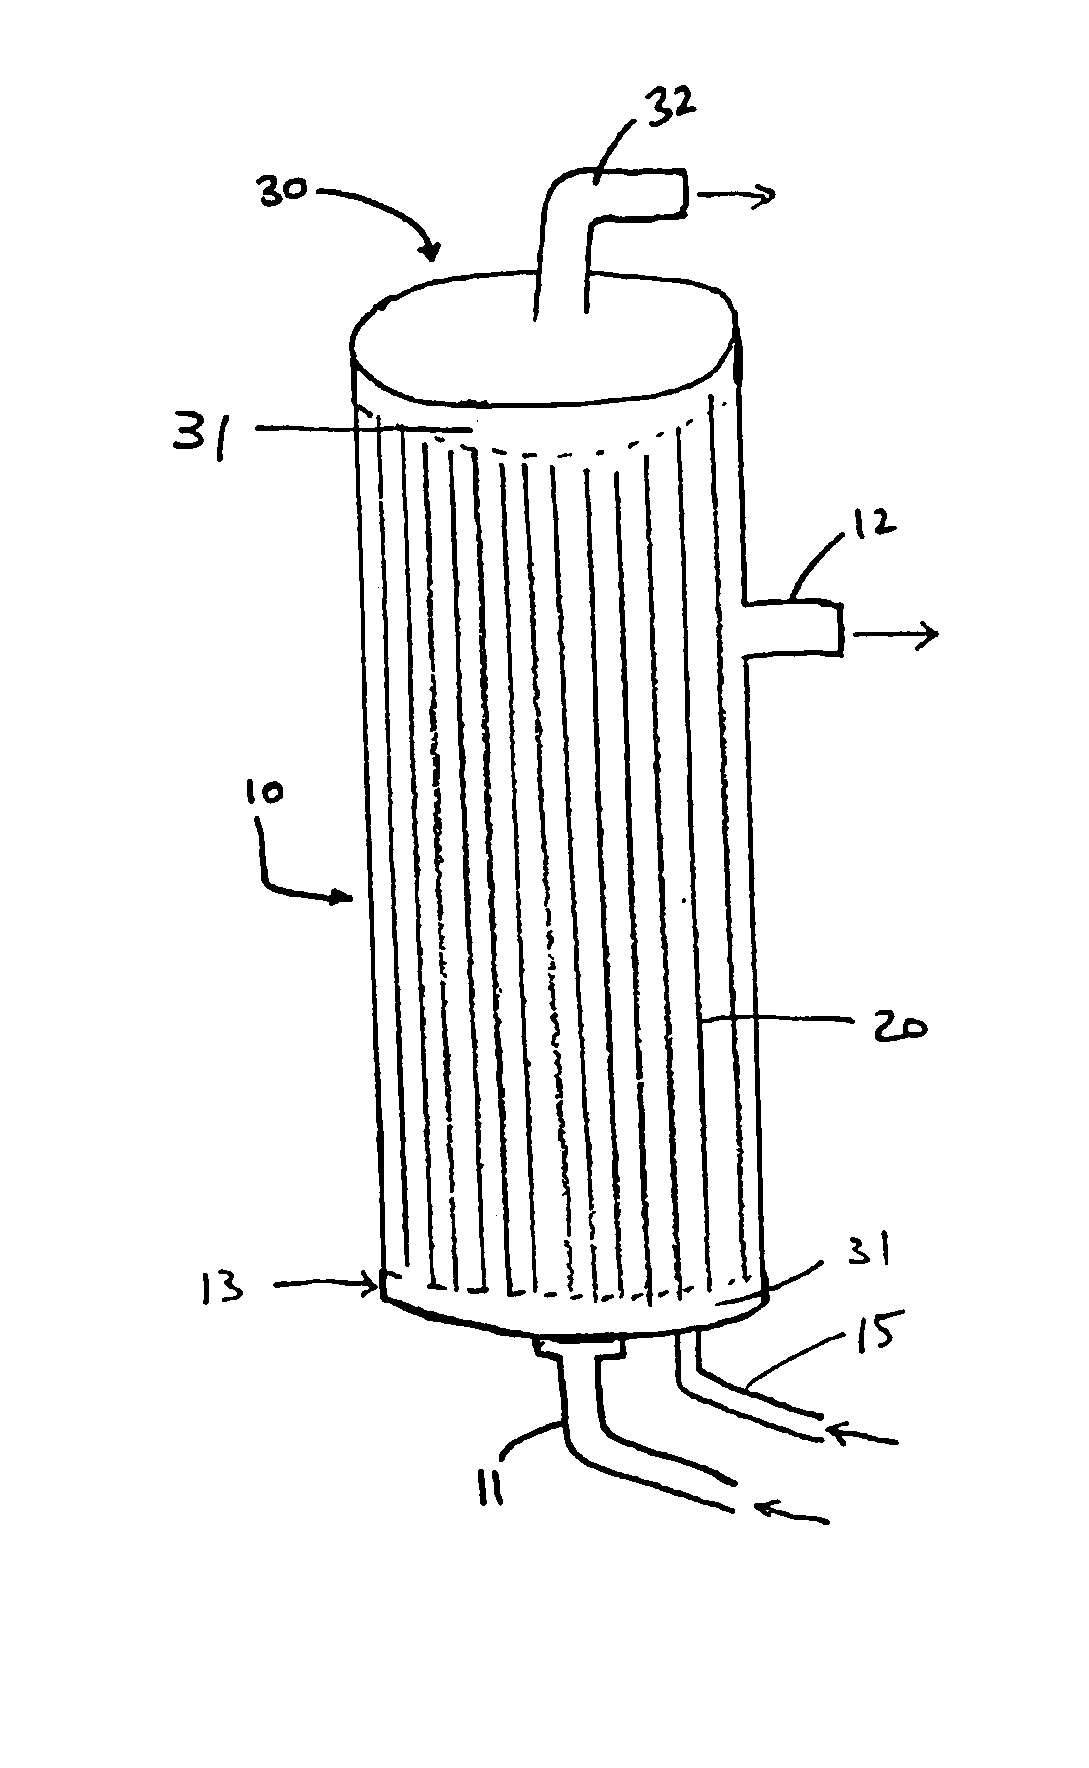 Hemodilution cap and methods of use in blood-processing procedures